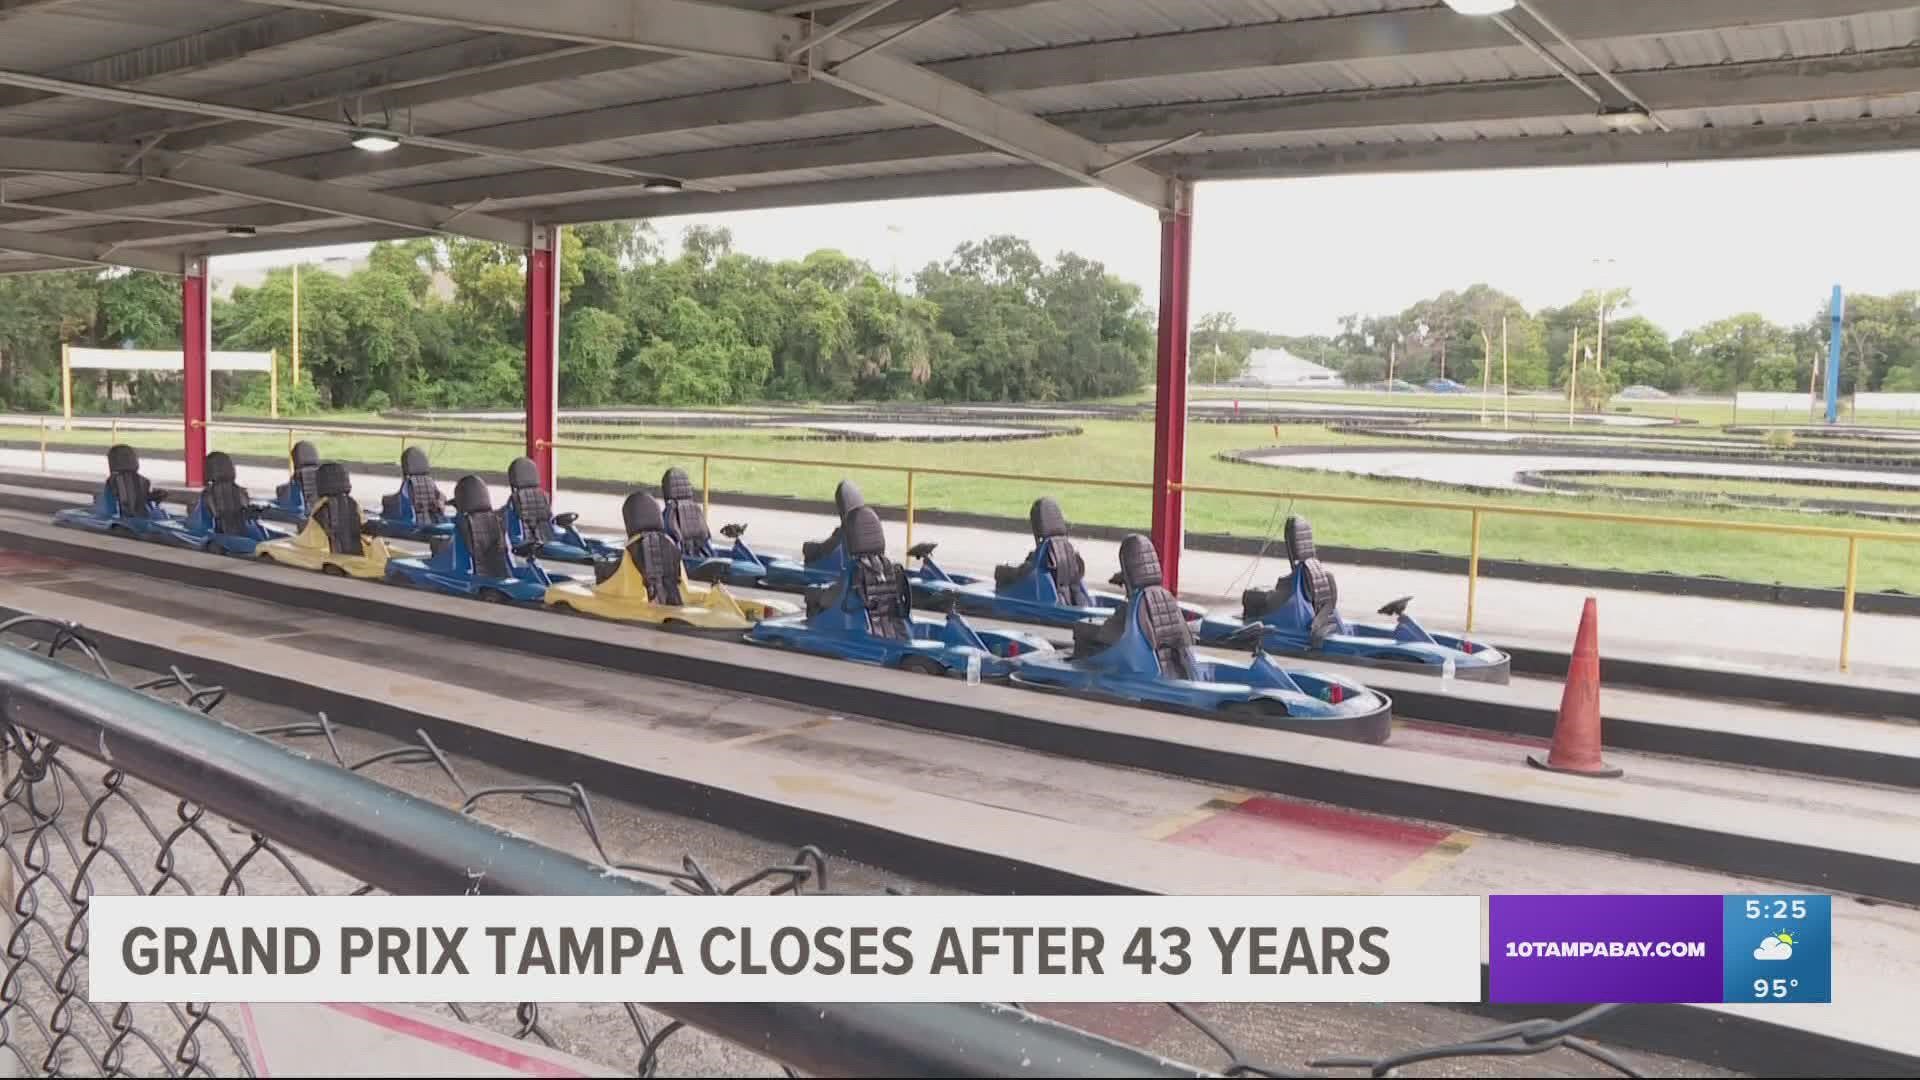 Grand Prix Tampa was home to more than 15 acres of fun for everyone with a go-kart track, arcades, miniature golf and more.